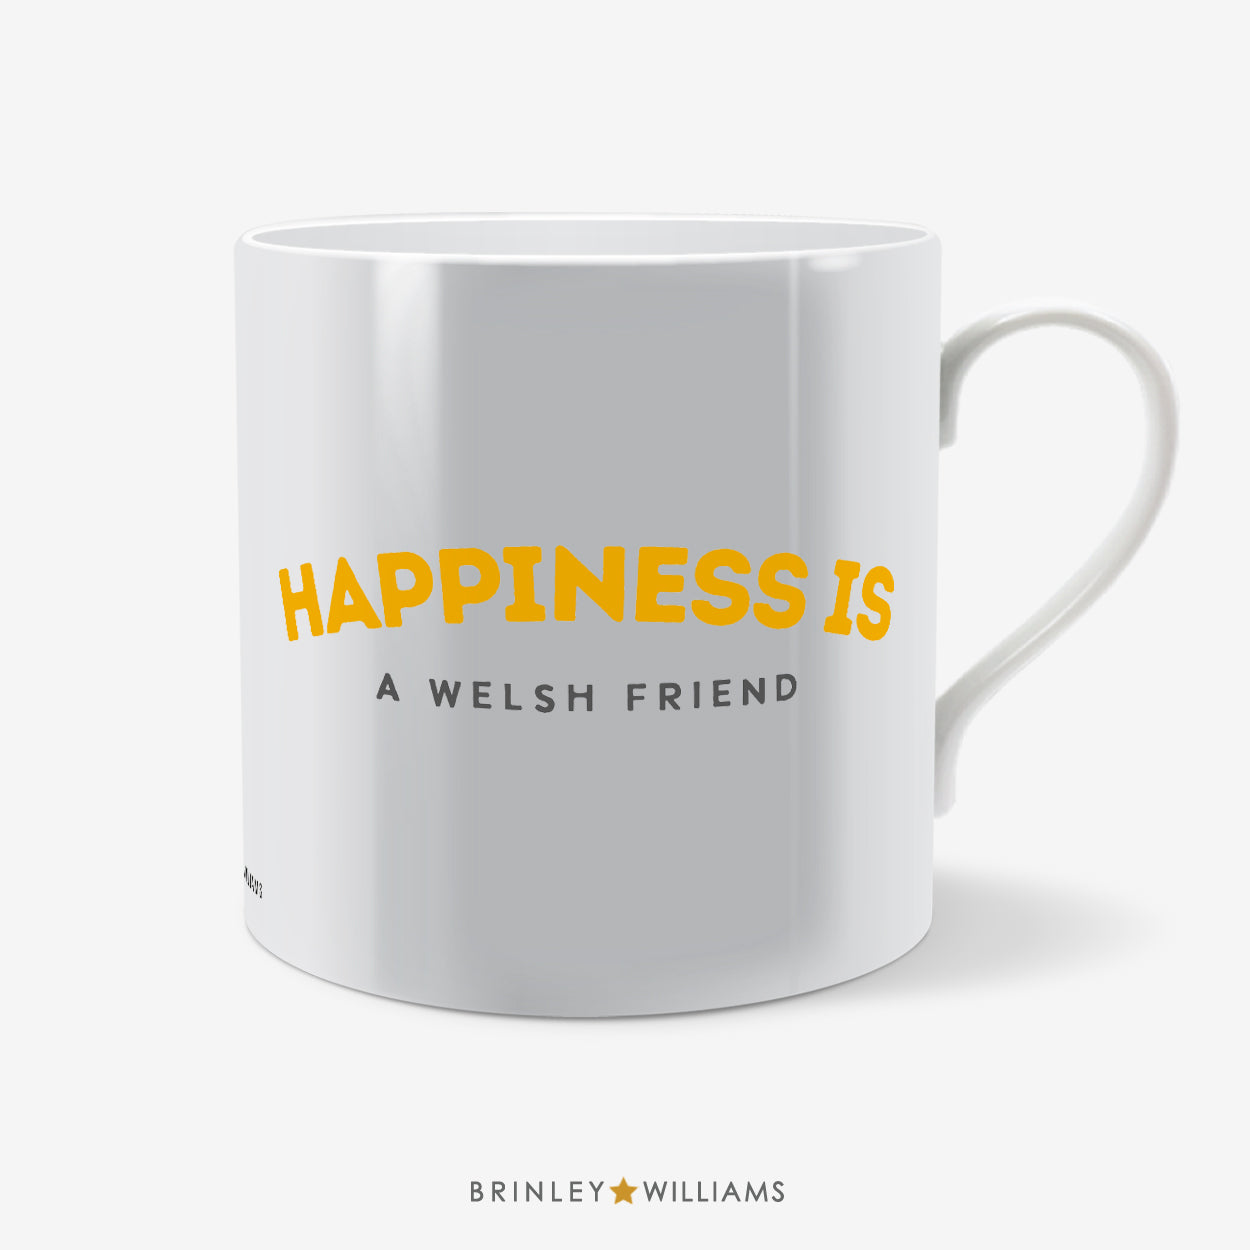 Happiness is a Welsh... Welsh Mug - Yellow